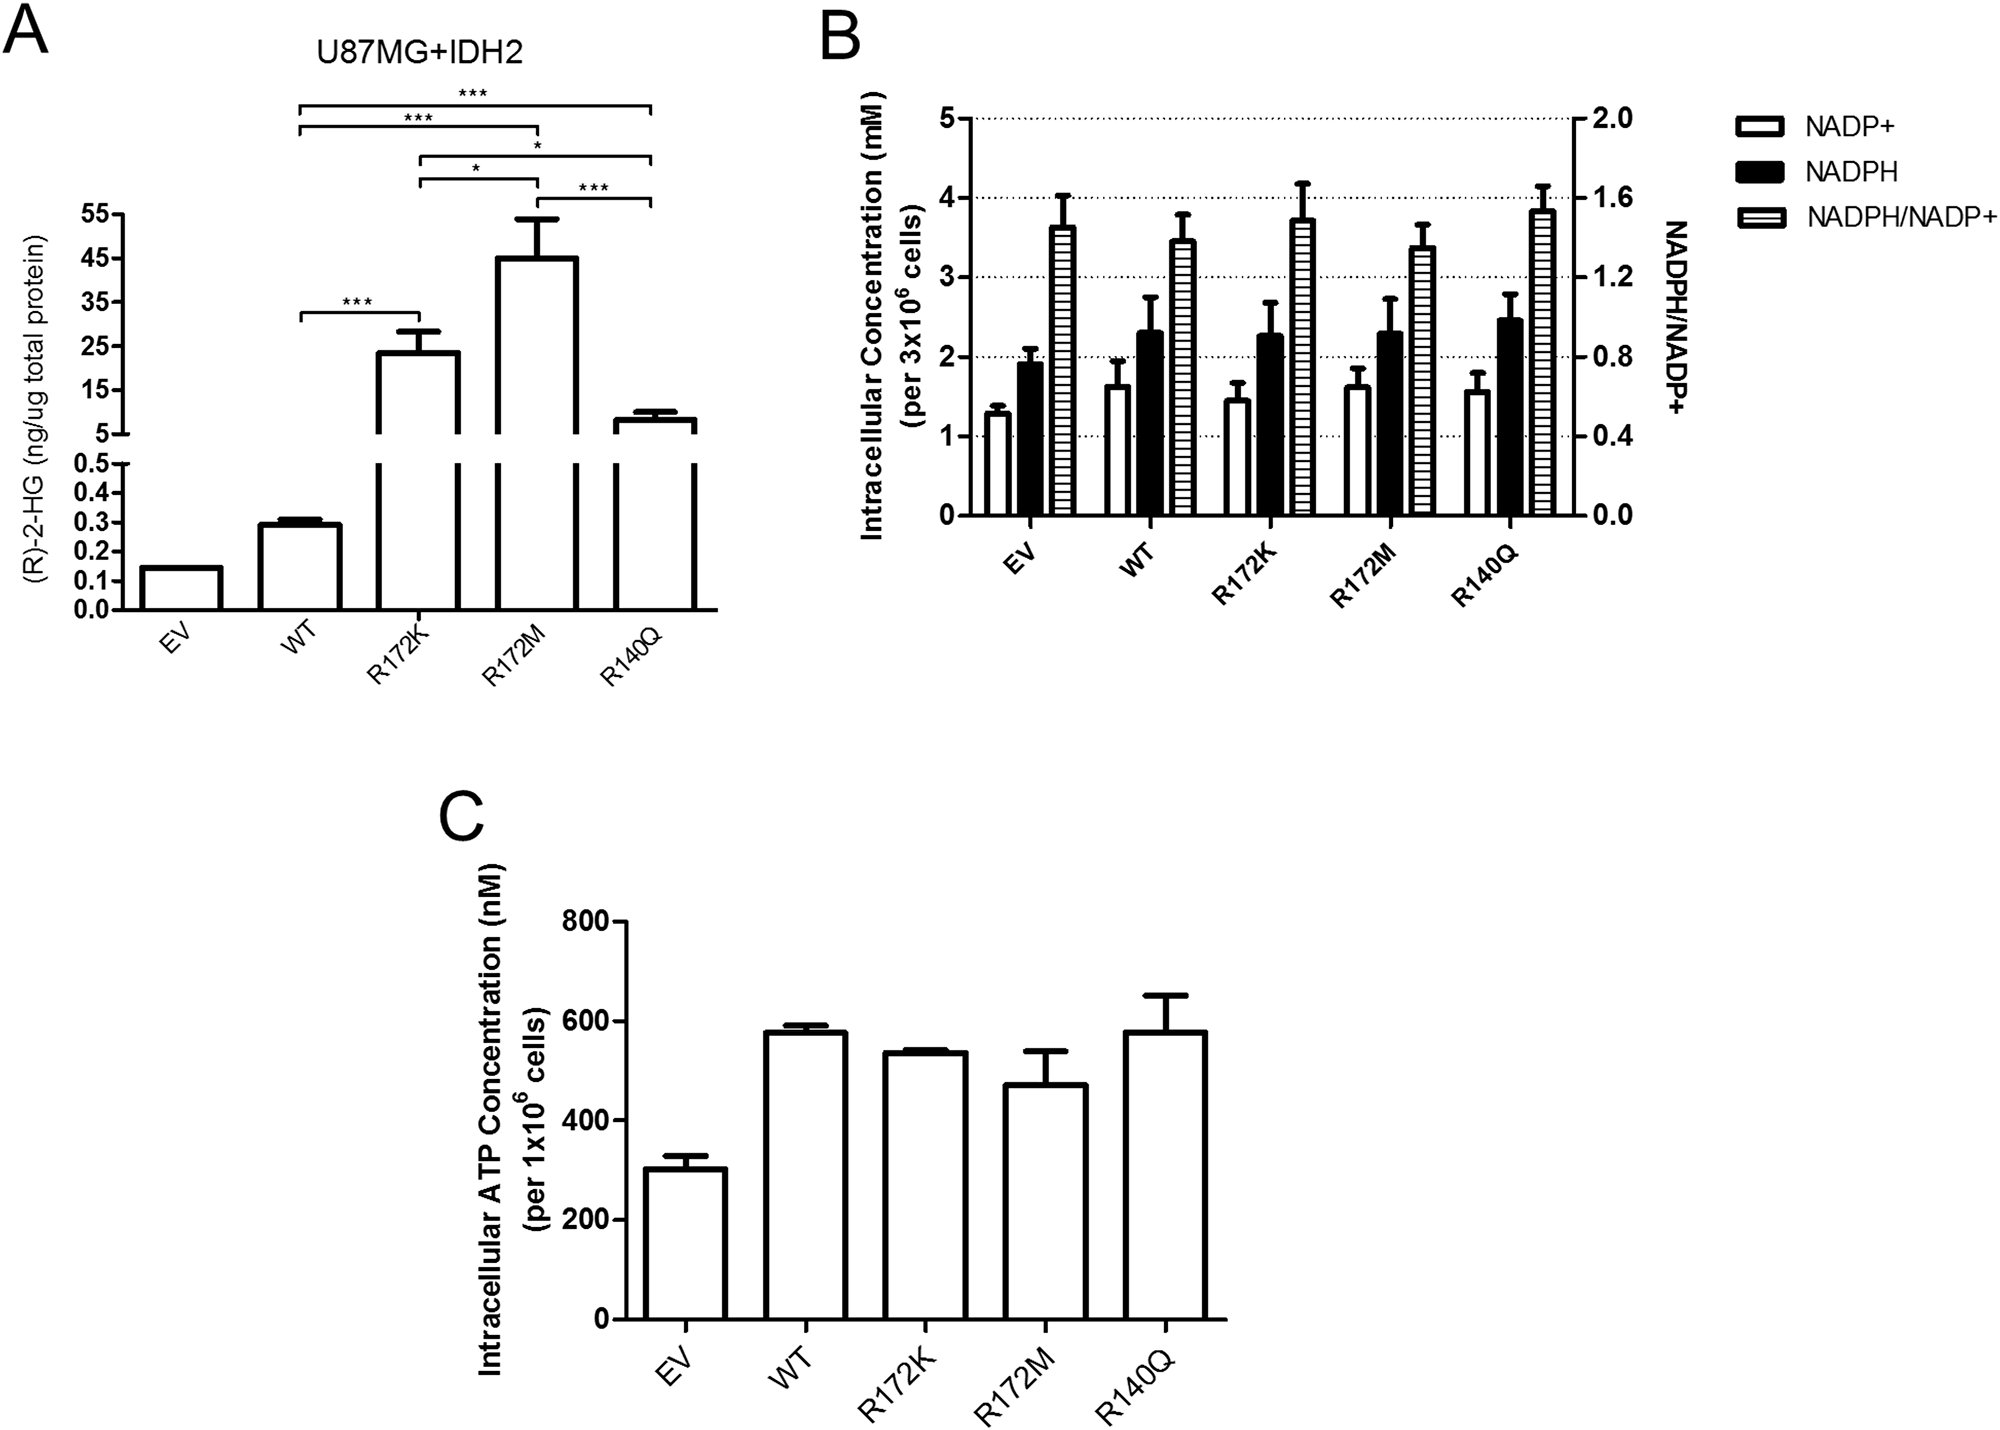 The amount of (R)-2-HG produced in U87MG cells is determined by the nature of the IDH2 mutation while levels of NADP and ATP remain unchanged.